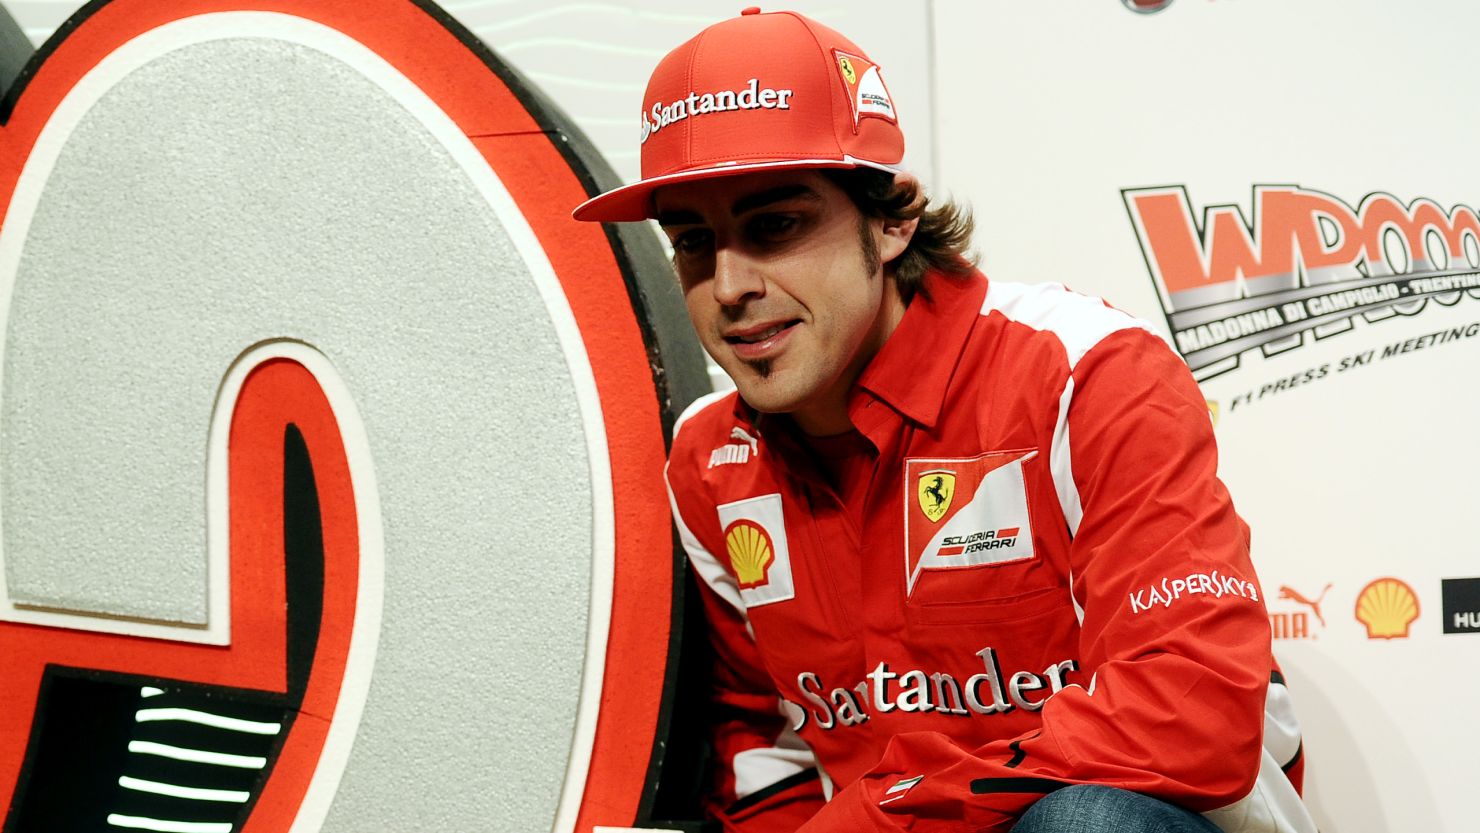 Ferrari's Fernando Alonso was crowned Formula One world champion in 2005 and 2006.